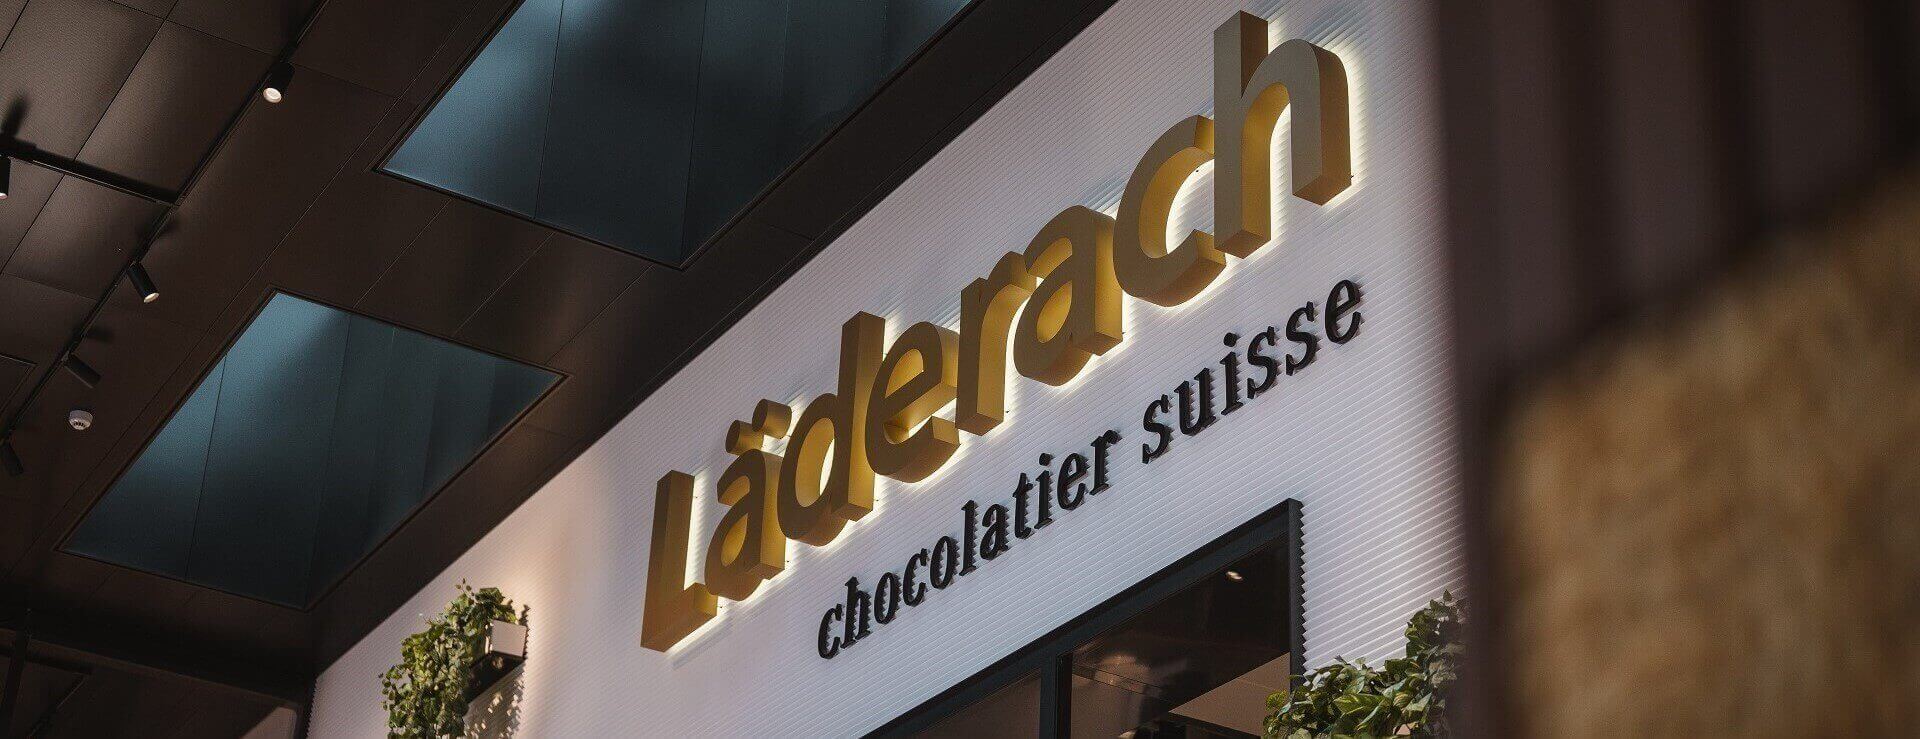 Läderach opens fresh artisanal Swiss chocolate experience stores in South Florida